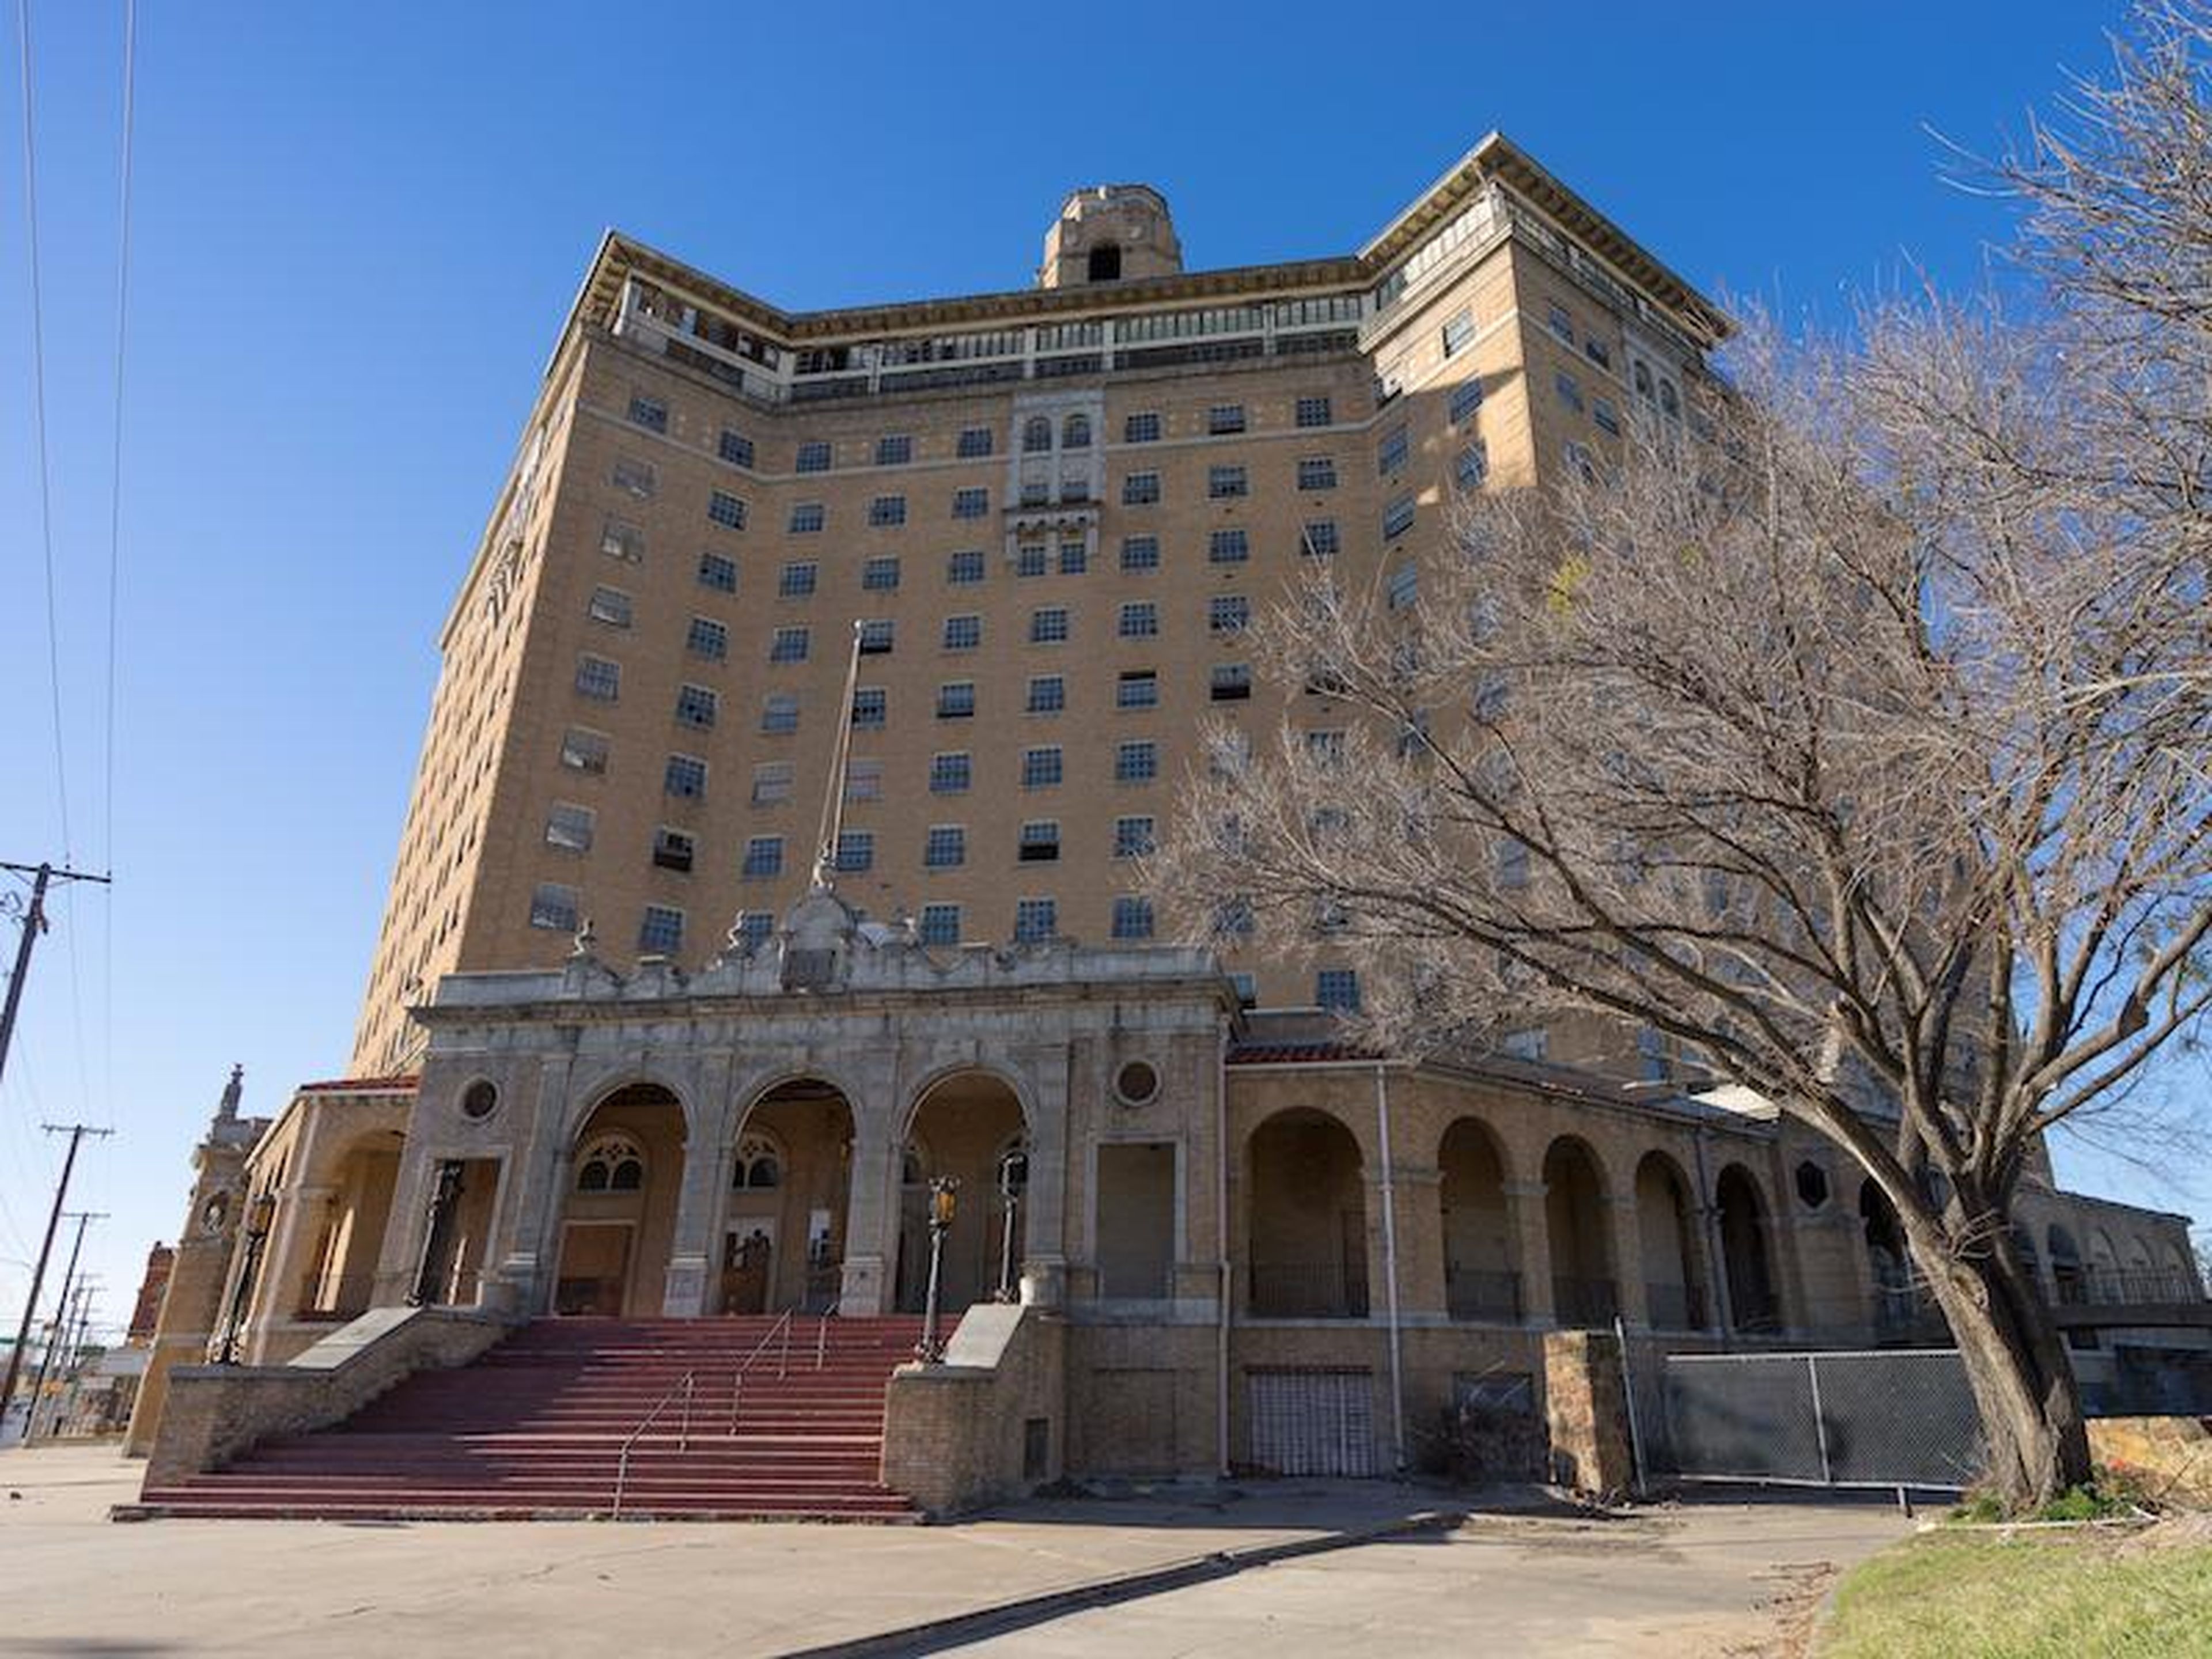 Legendary guests including Lyndon Johnson, Judy Garland, and Bonnie and Clyde once stayed at this now abandoned hotel.